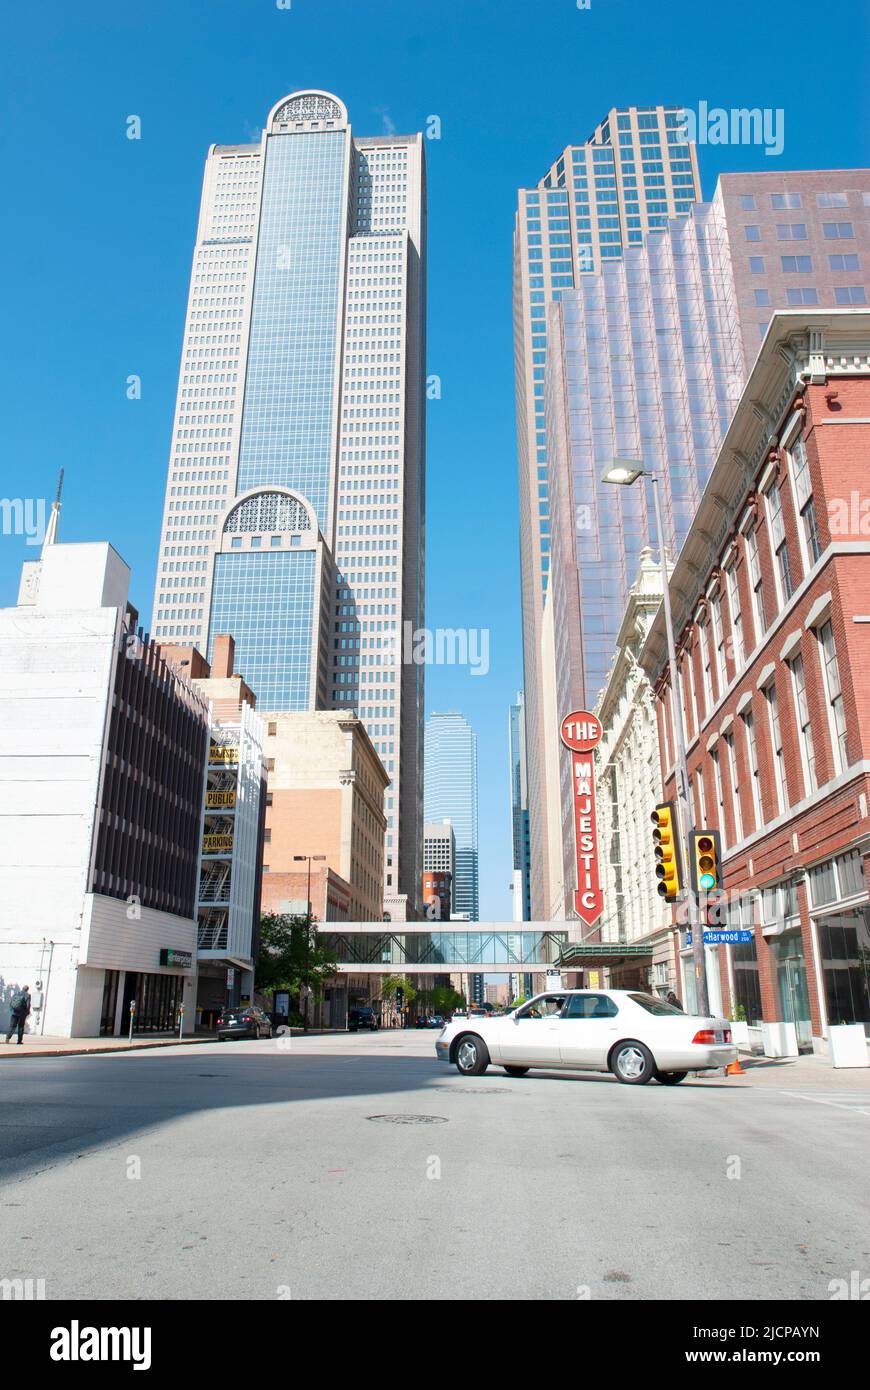 View of downtown Dallas, Texas looking west. The Majestic Theater on the right side of the street ca. 2013 Stock Photo